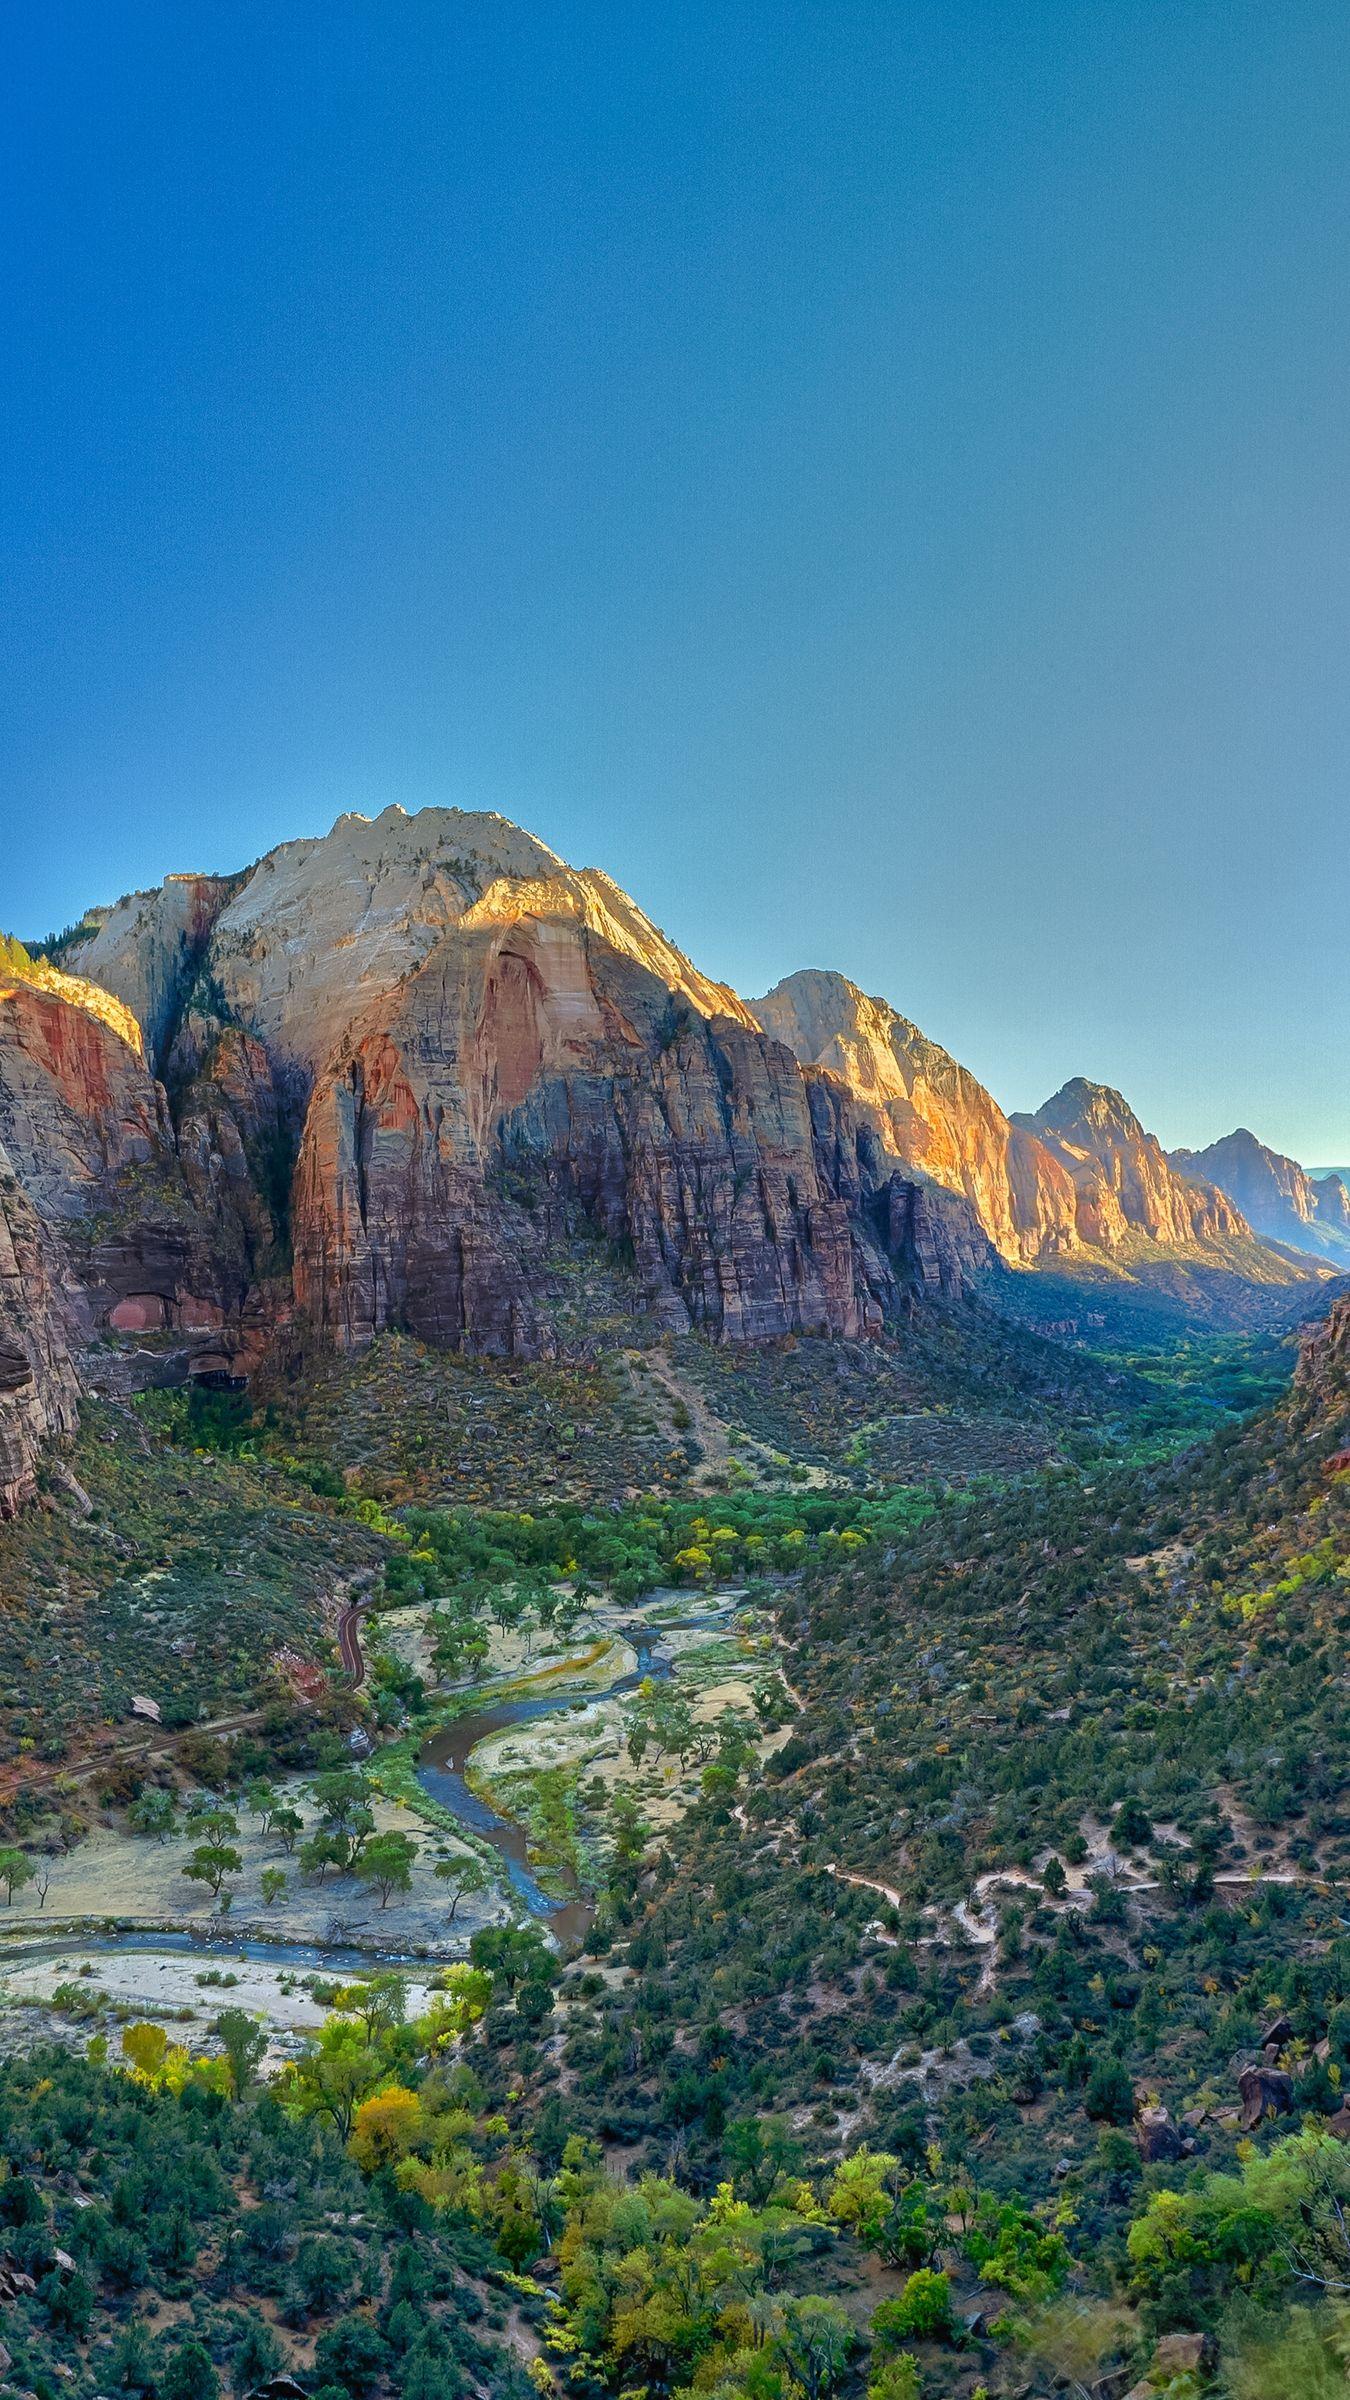 Virgin River Valley Zion National Park Canyon IPhone Wallpaper